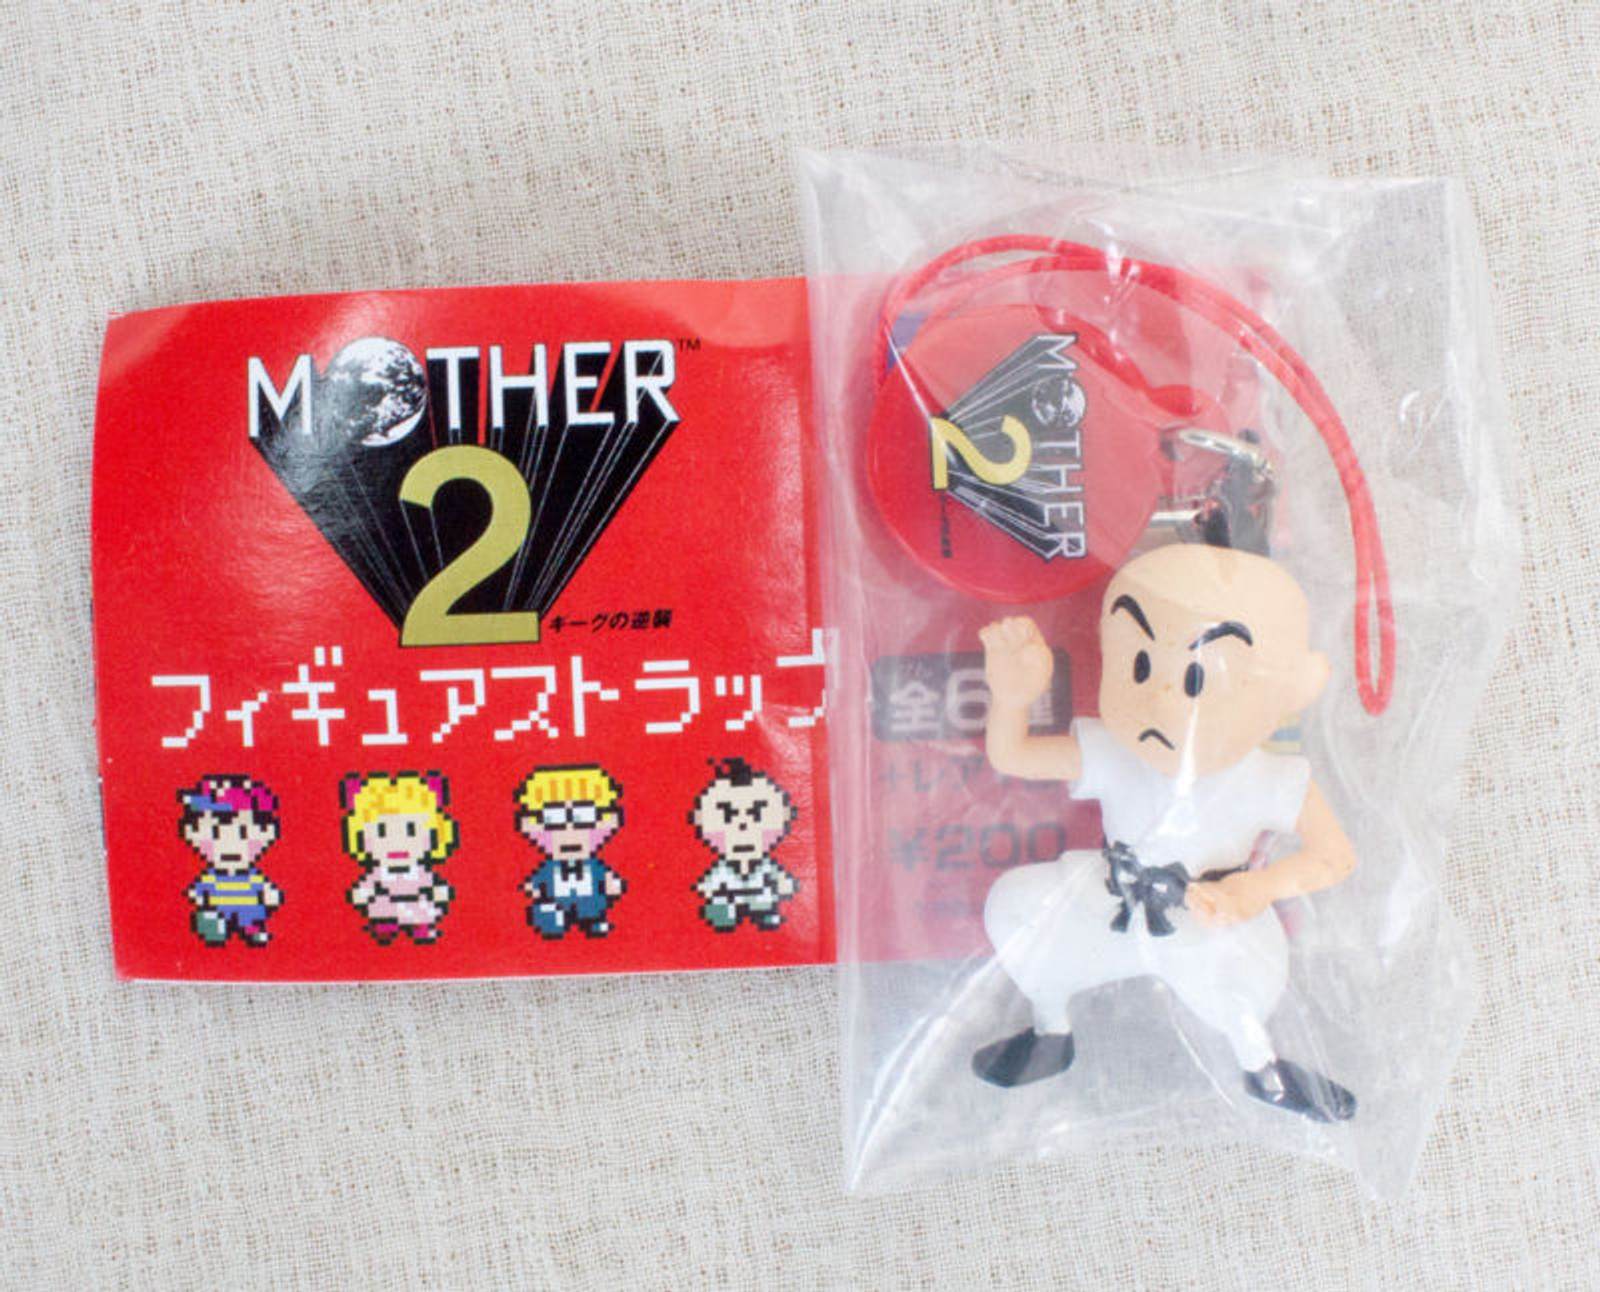 Pokey Takara TOMY A.R.T.S Earthbound  Mother 2 Figure Strap pt 2 